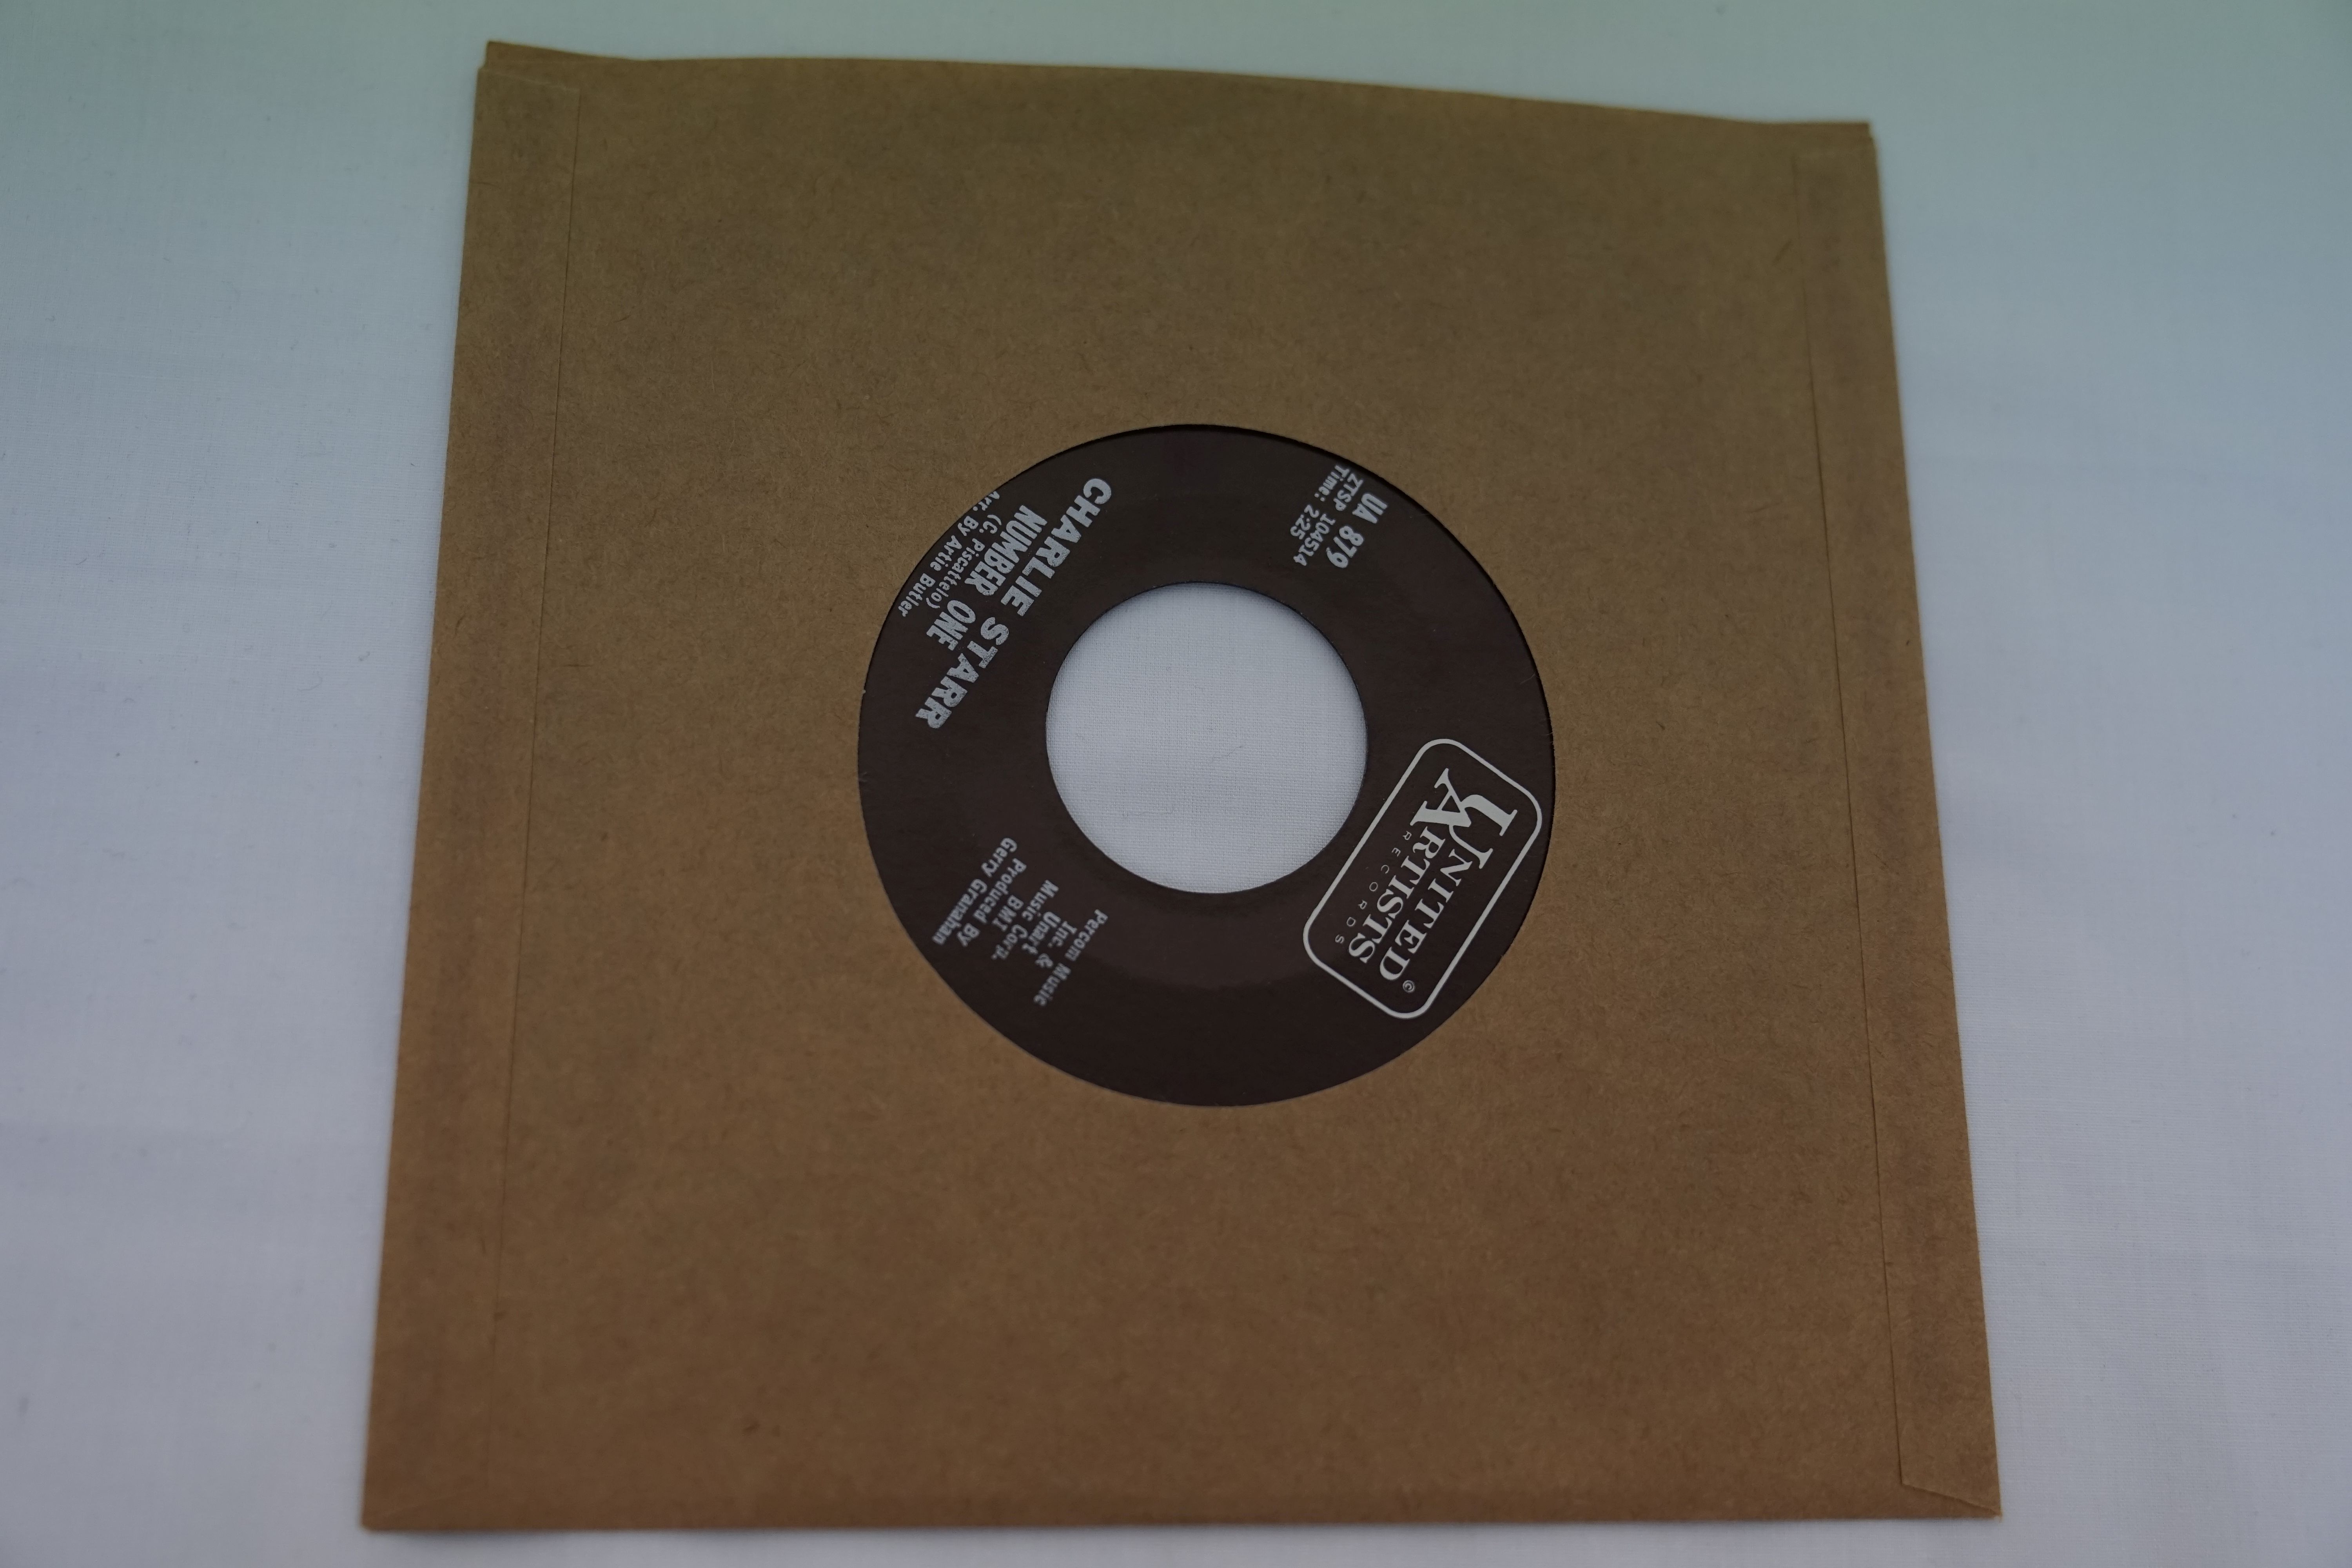 Vinyl - Charlie Starr - Number One (United Artists Records UA 879) NM archive. An original US 1st